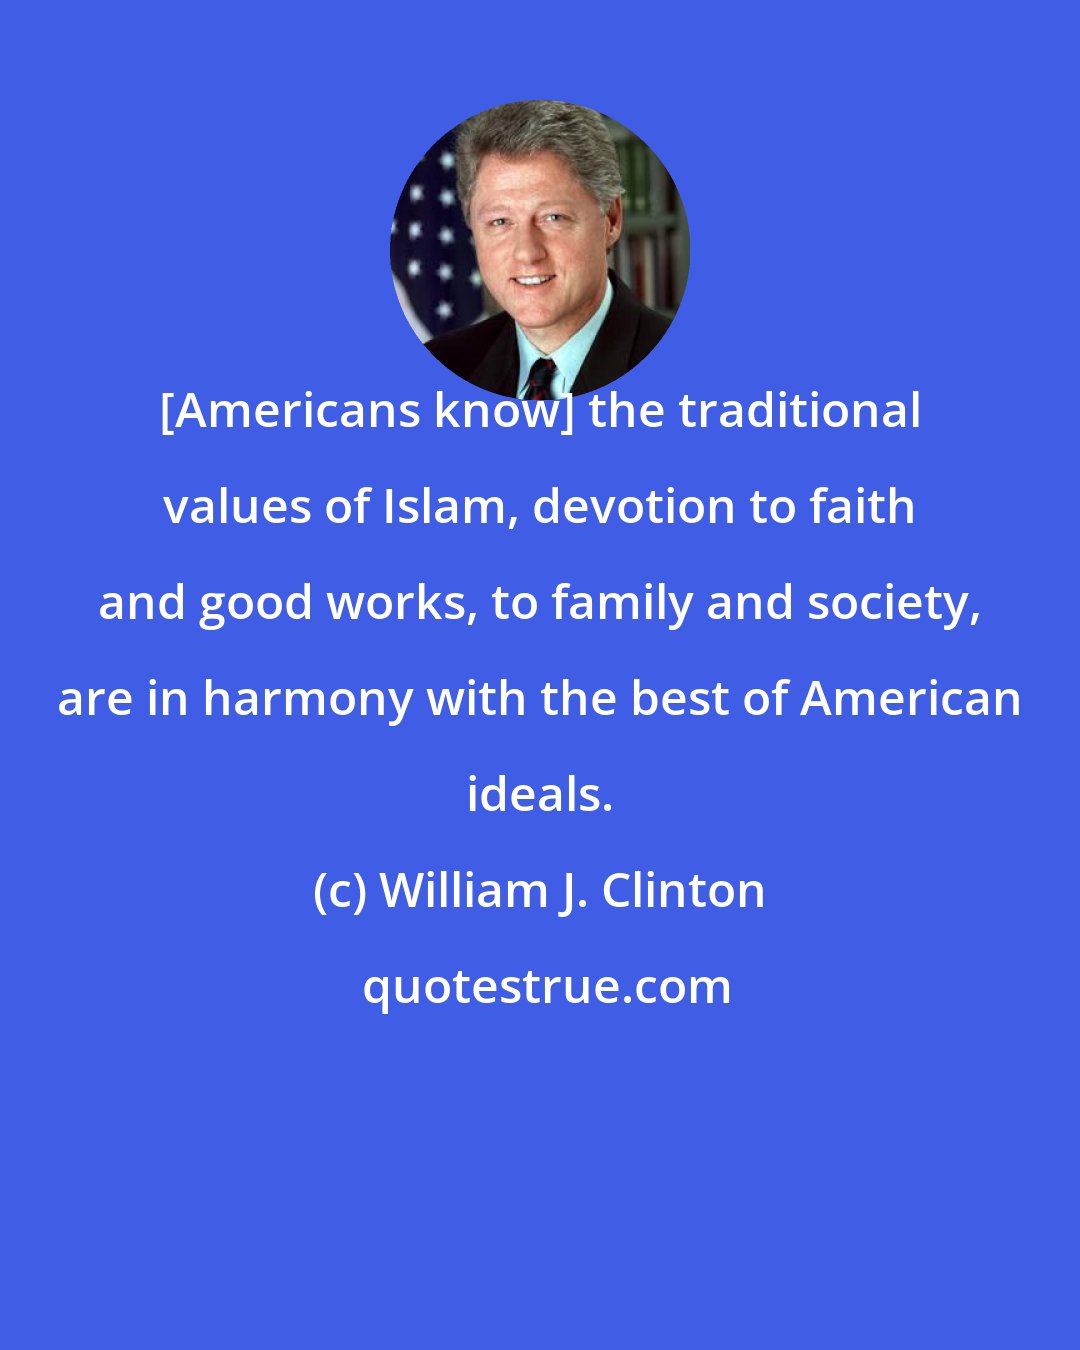 William J. Clinton: [Americans know] the traditional values of Islam, devotion to faith and good works, to family and society, are in harmony with the best of American ideals.